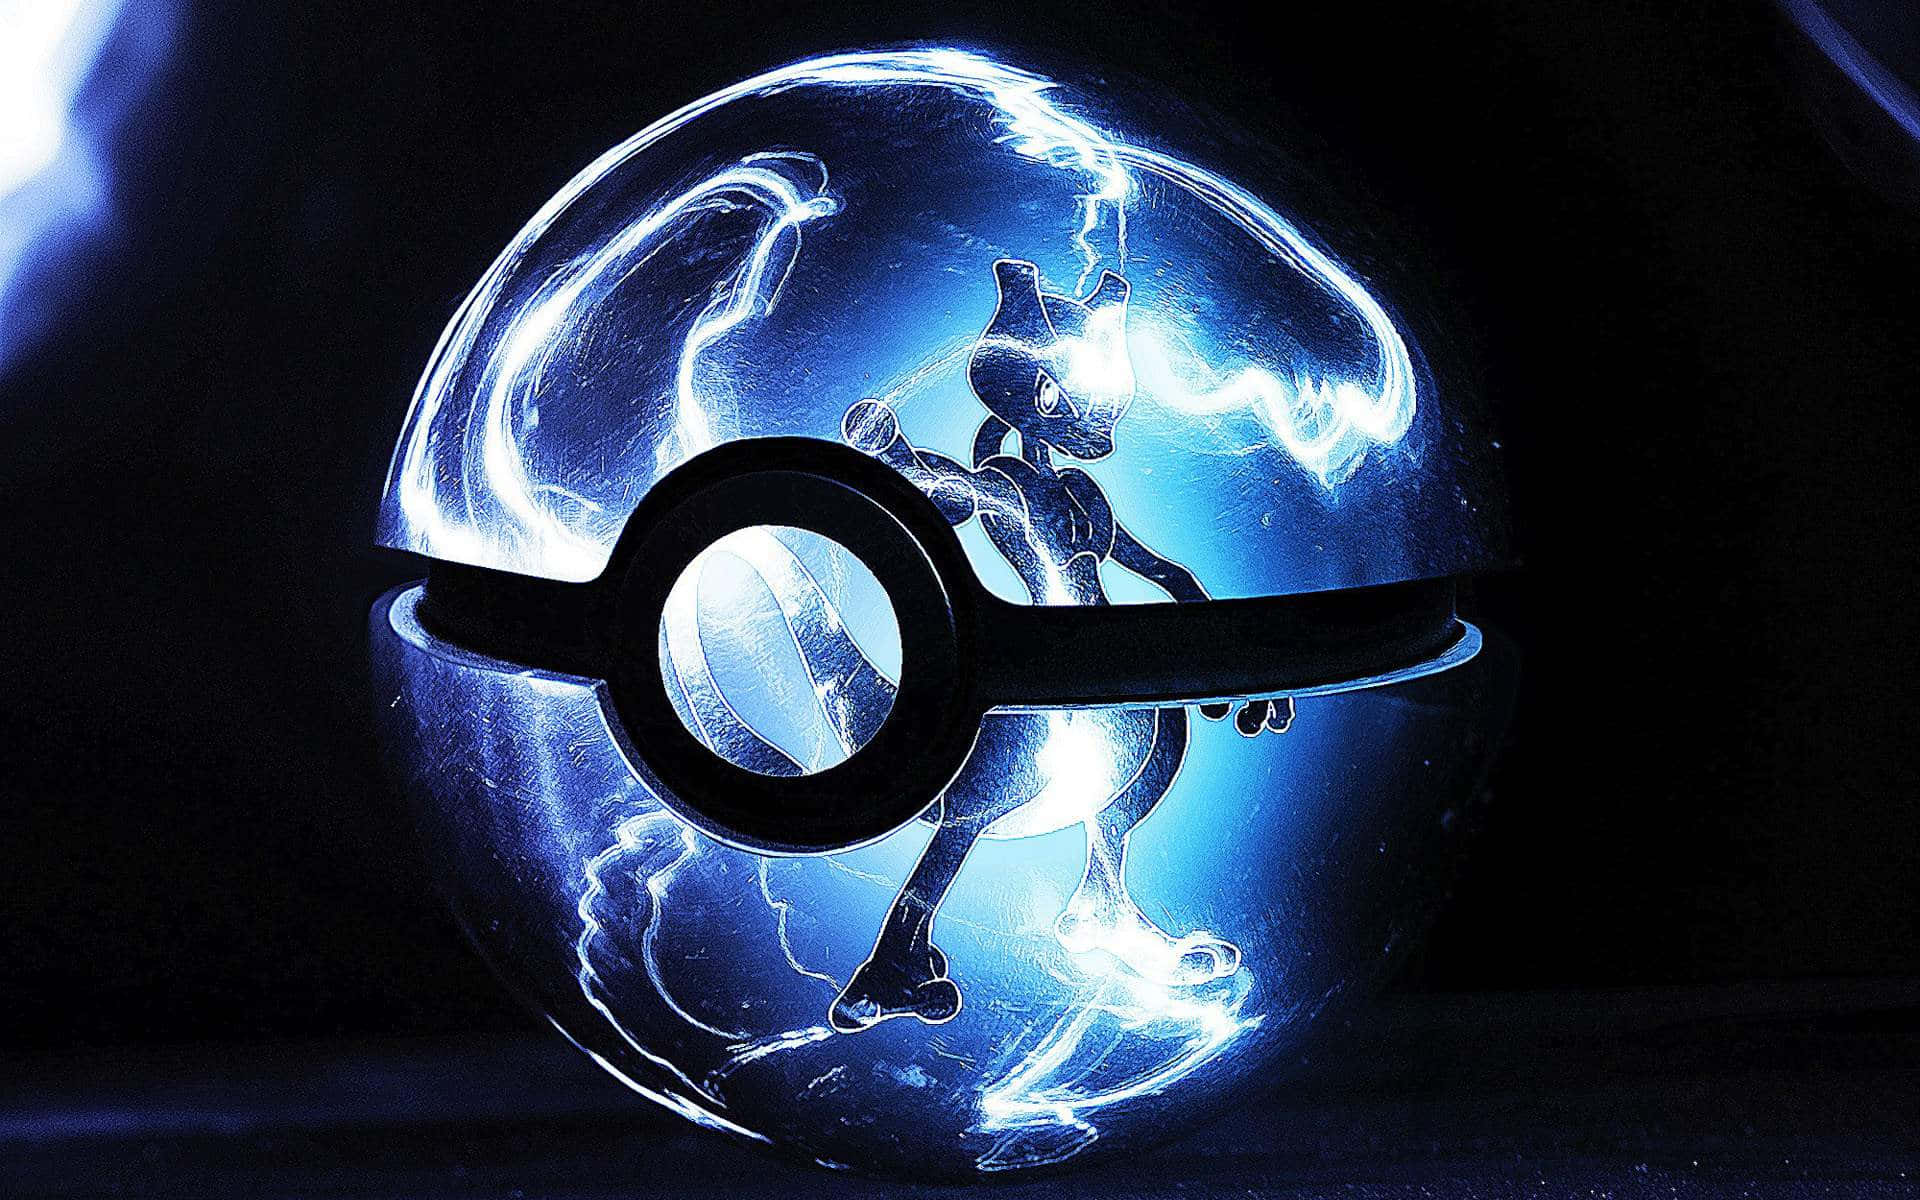 "Unlock your hidden potential with Mewtwo"